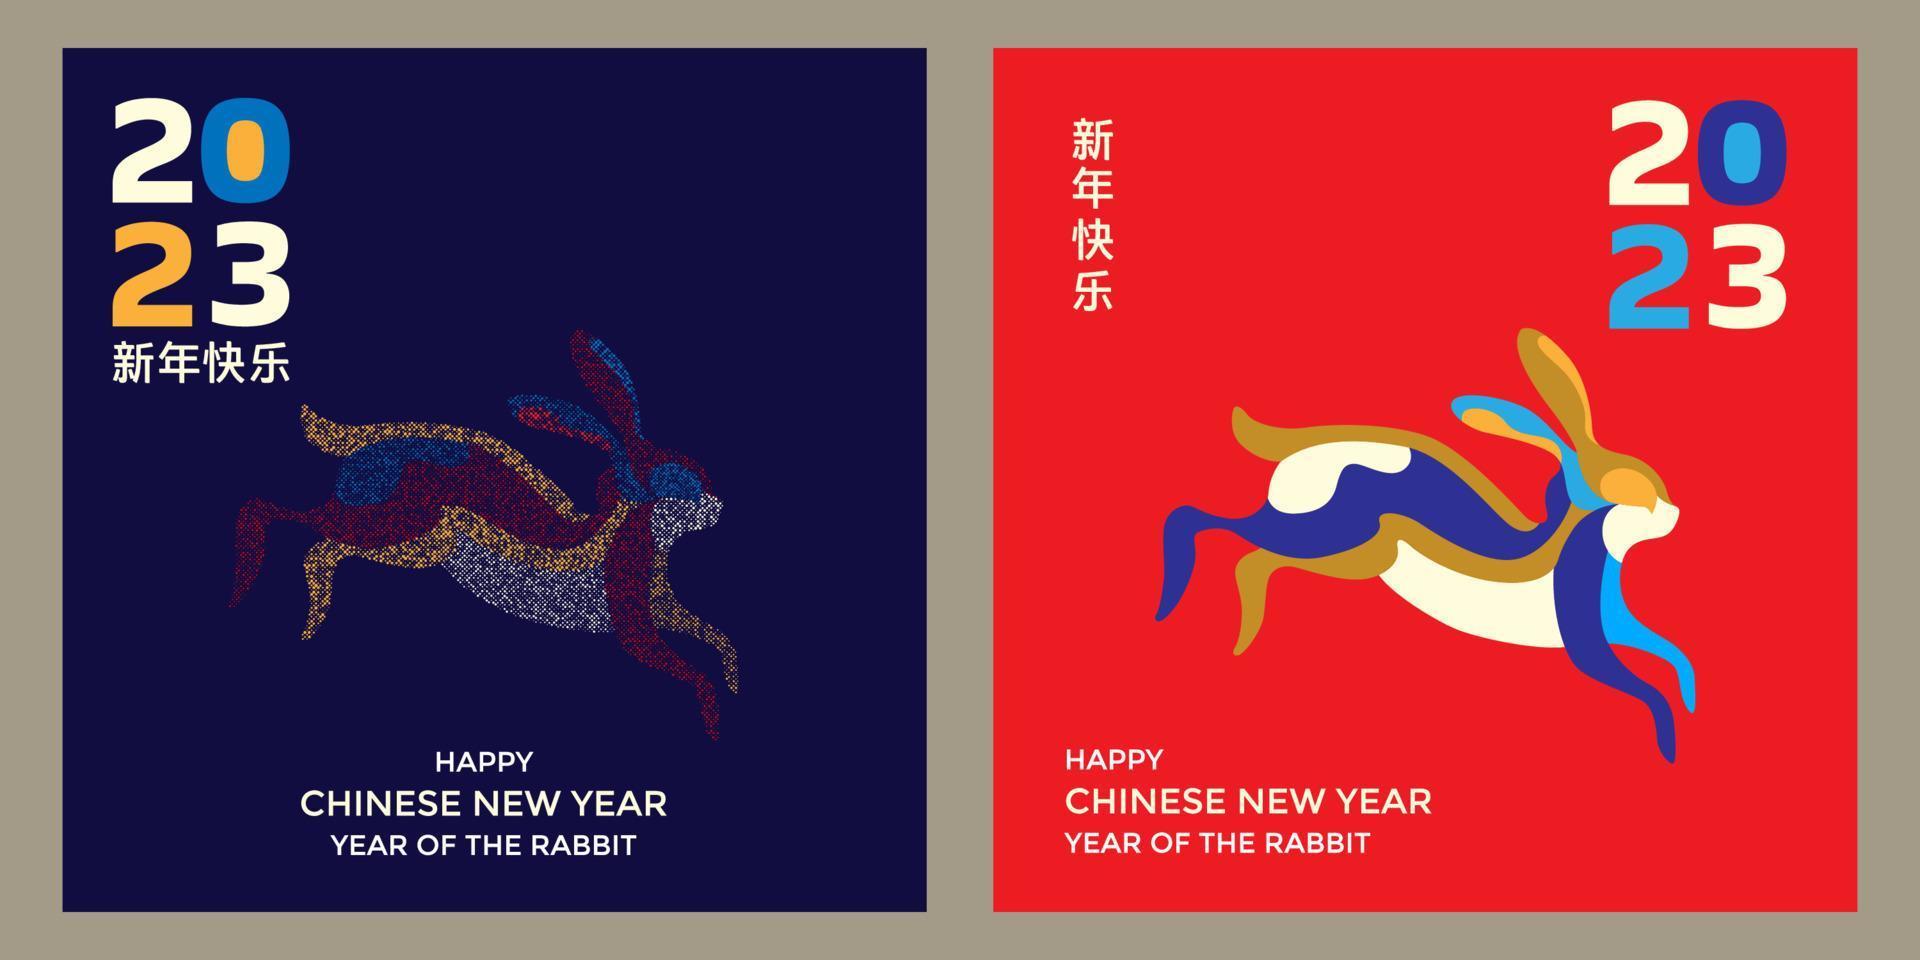 Chinese New Year 2023 modern art design for social media post, cover, card, banner with rabbit symbol. Hieroglyphs mean Happy Chinese New Year vector